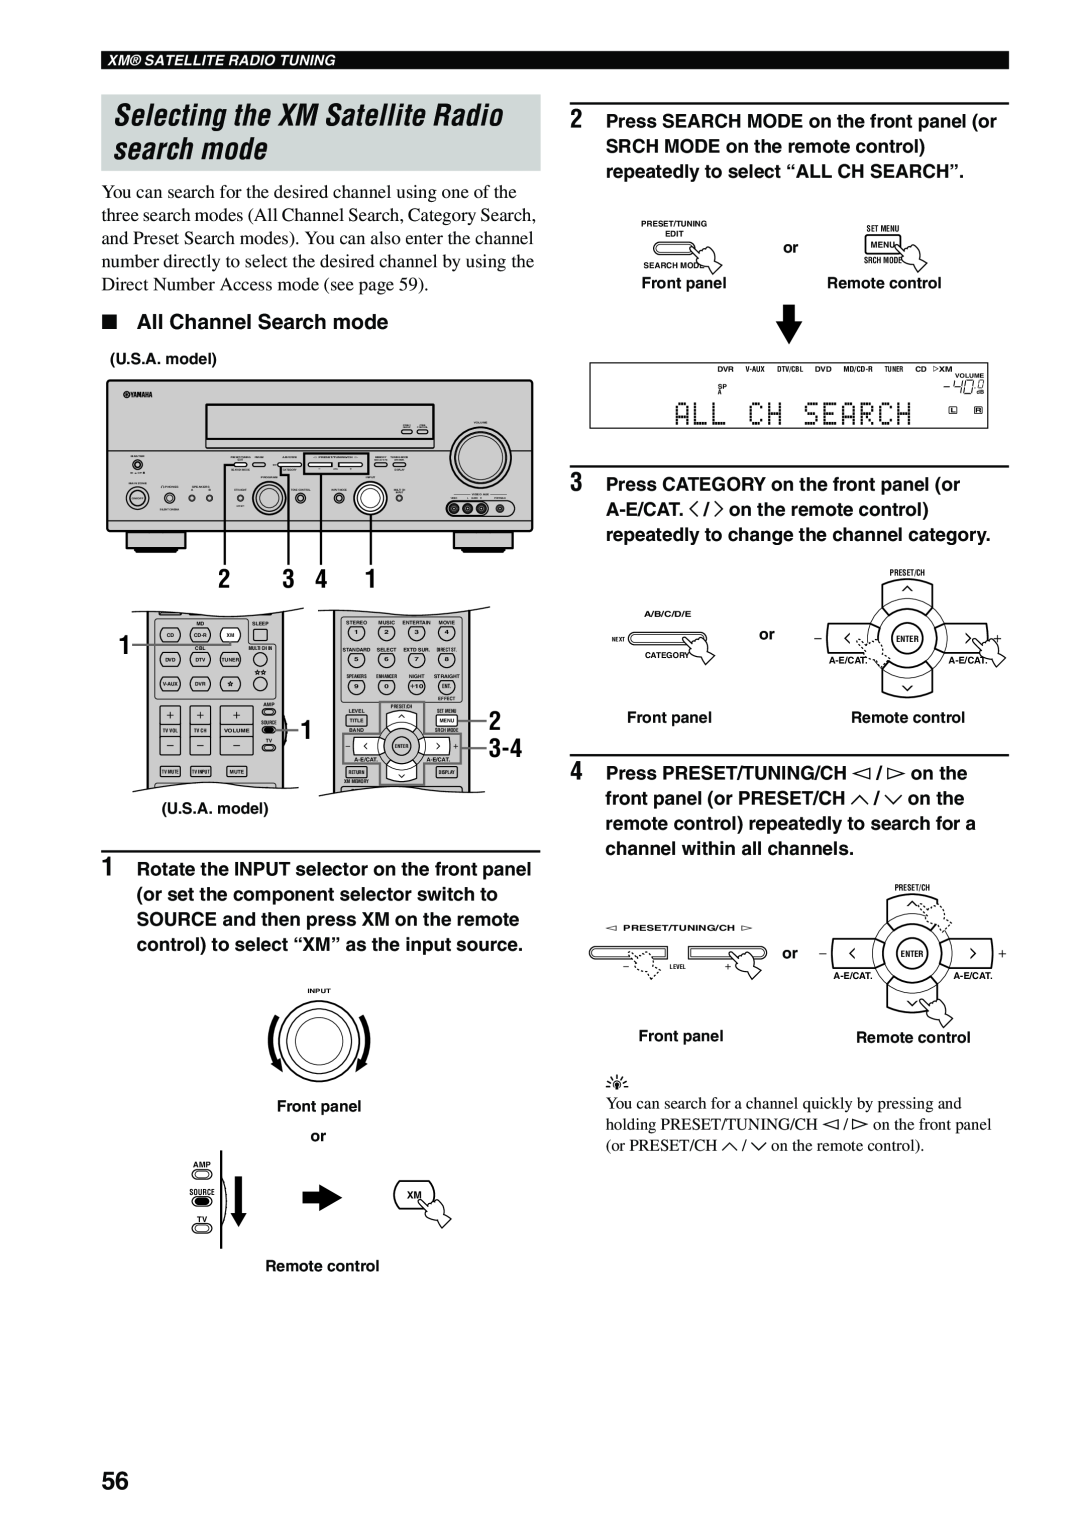 Yamaha RX-V559 owner manual Selecting the XM Satellite Radio search mode, Ch Search, All Channel Search mode 